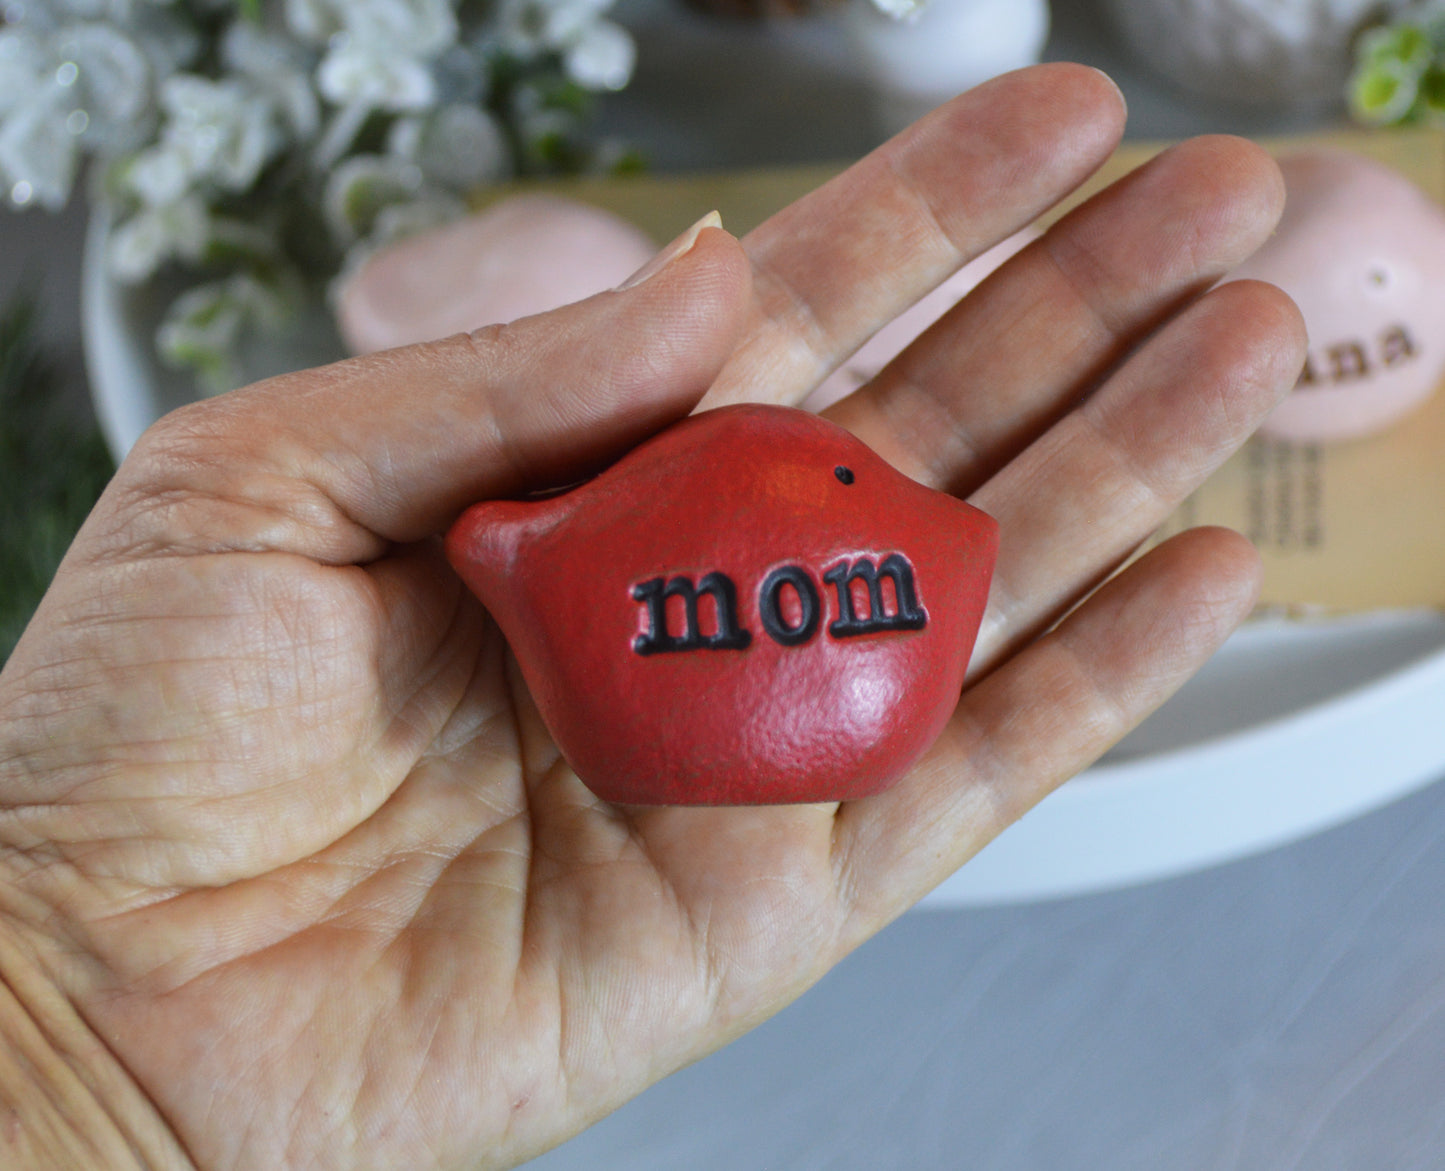 Gift for mom / 3 red love you mom birds / FREE SHIPPING